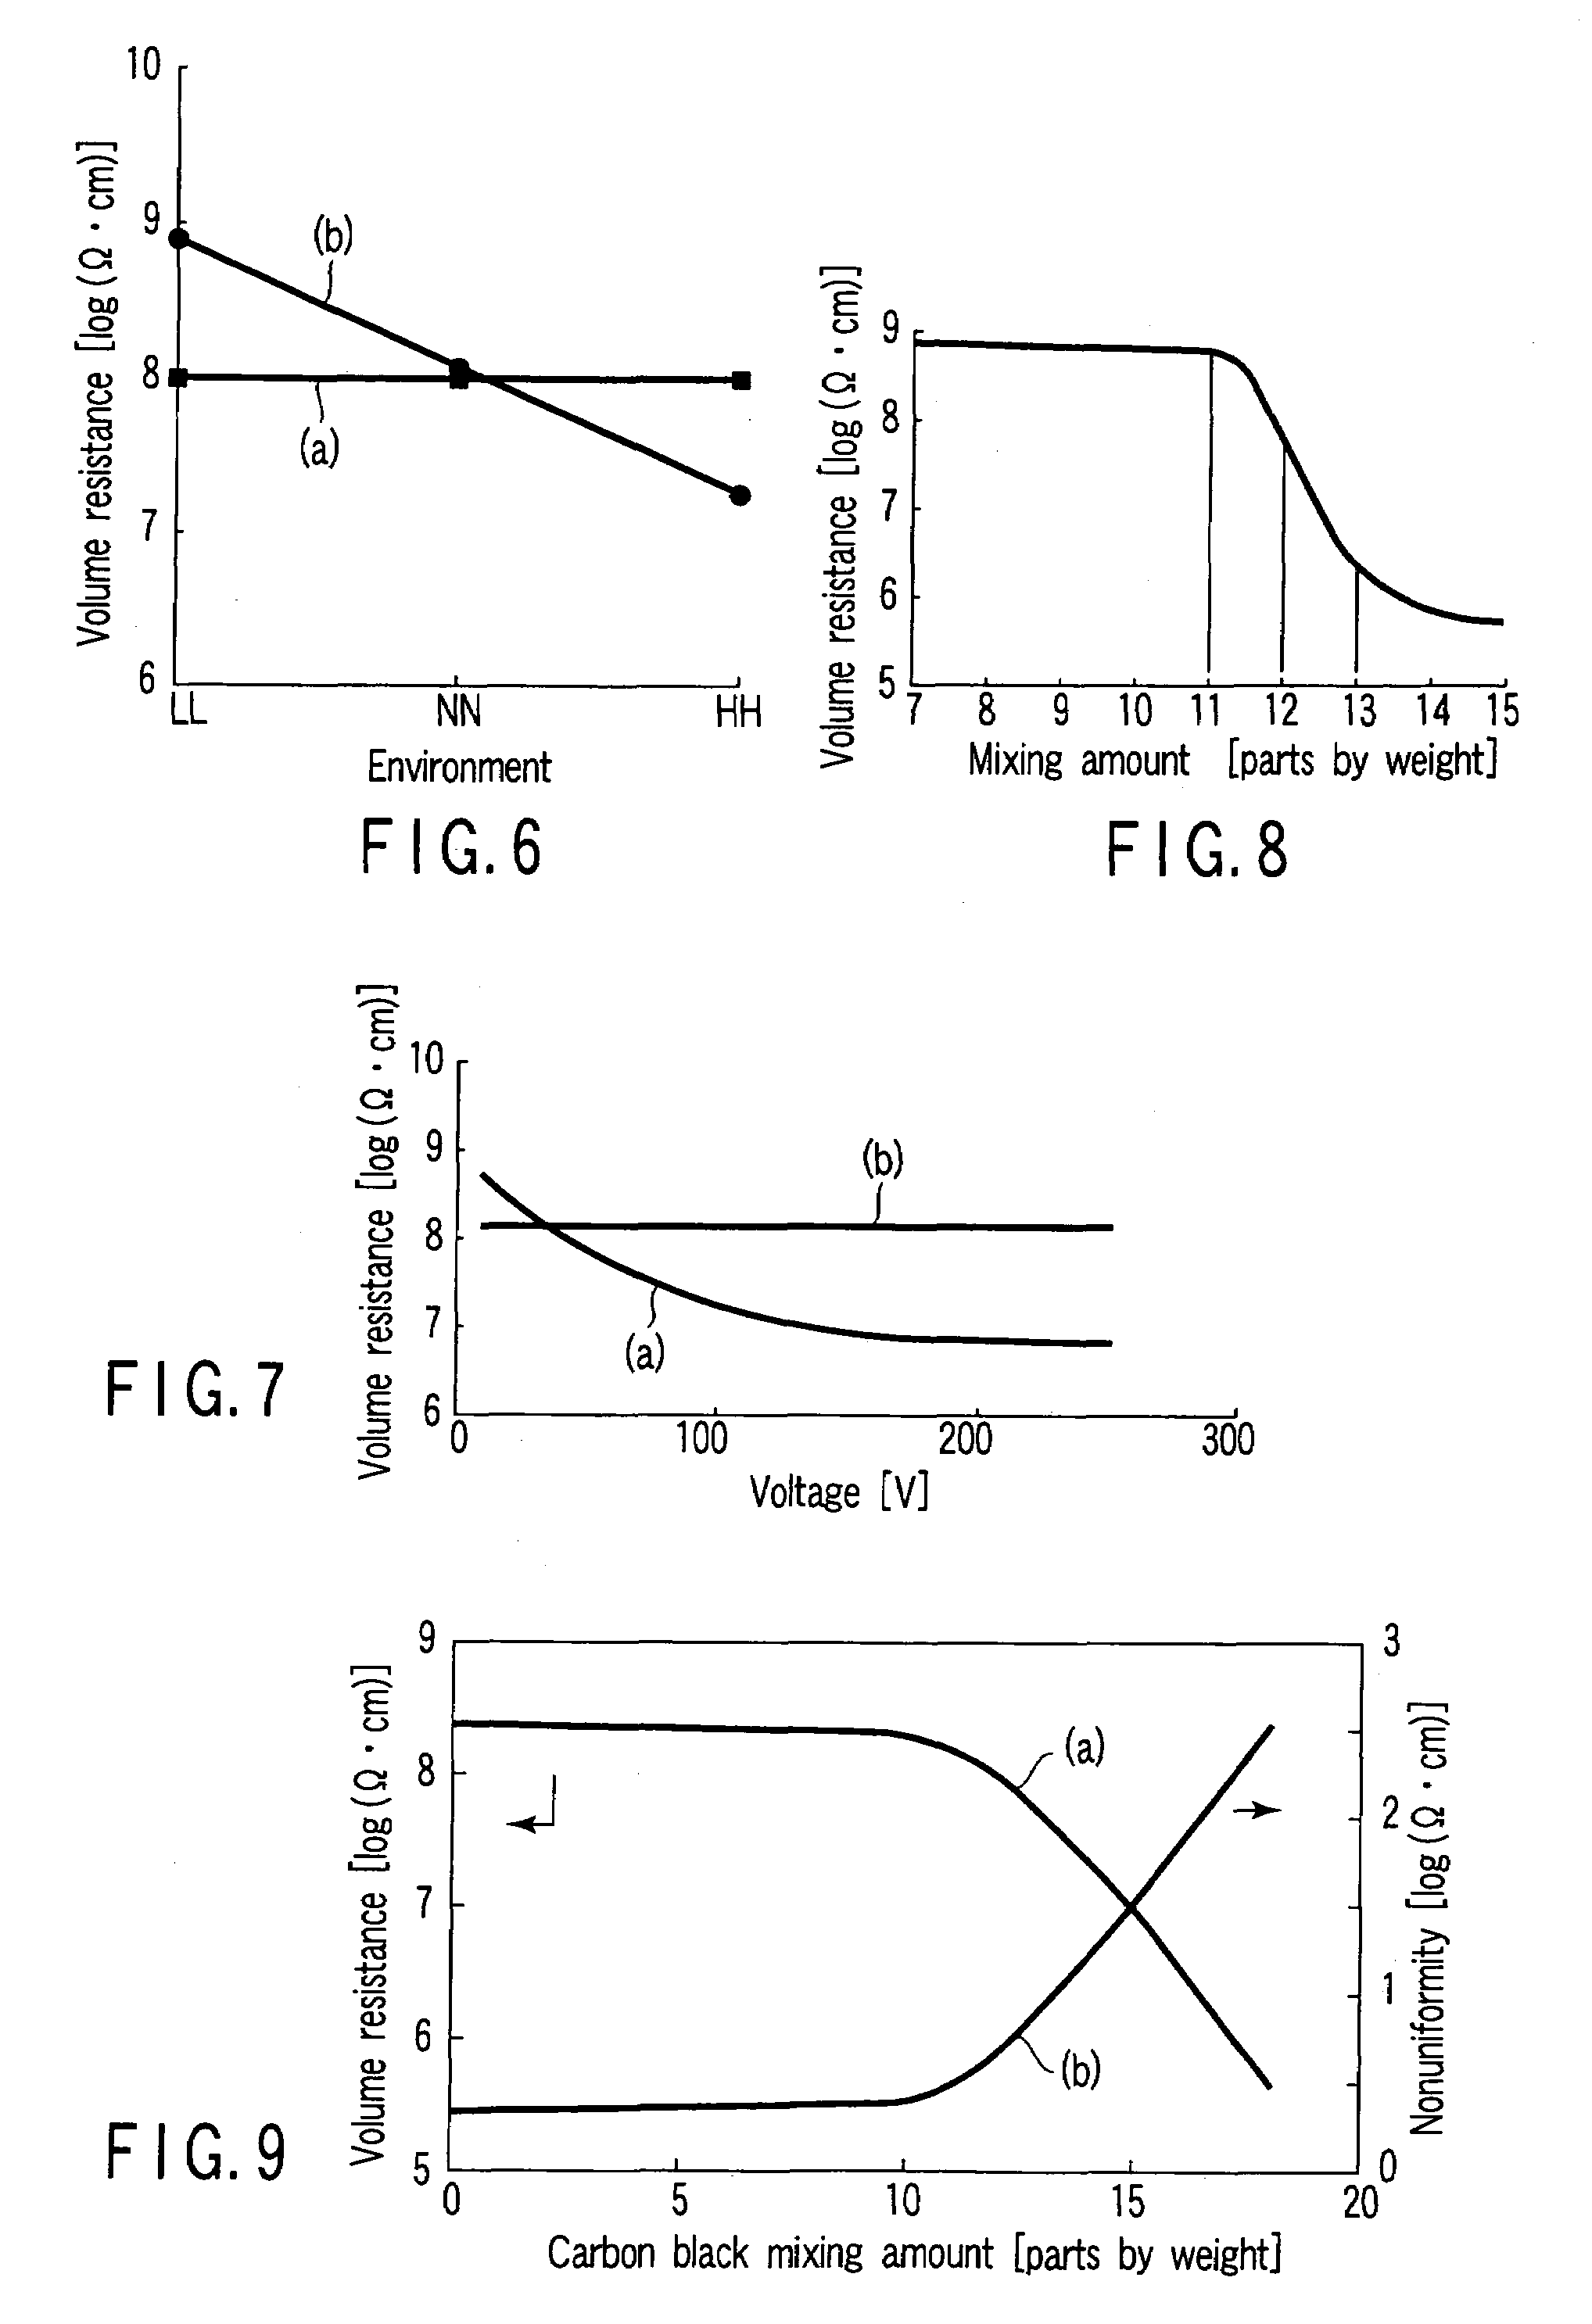 Electrically conductive member